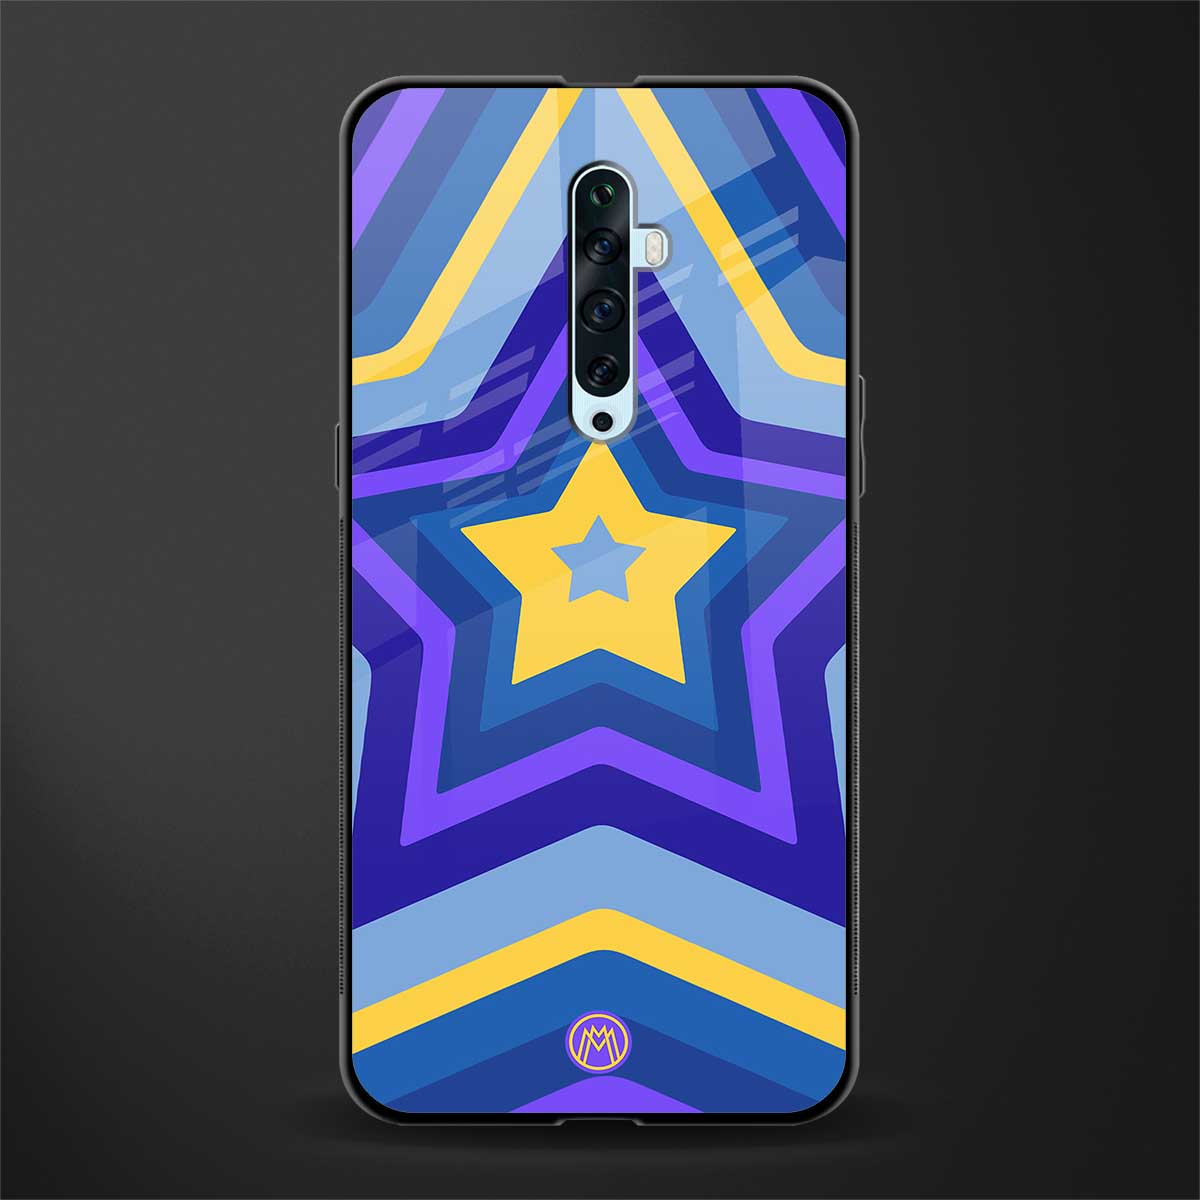 y2k yellow blue stars glass case for oppo reno 2z image